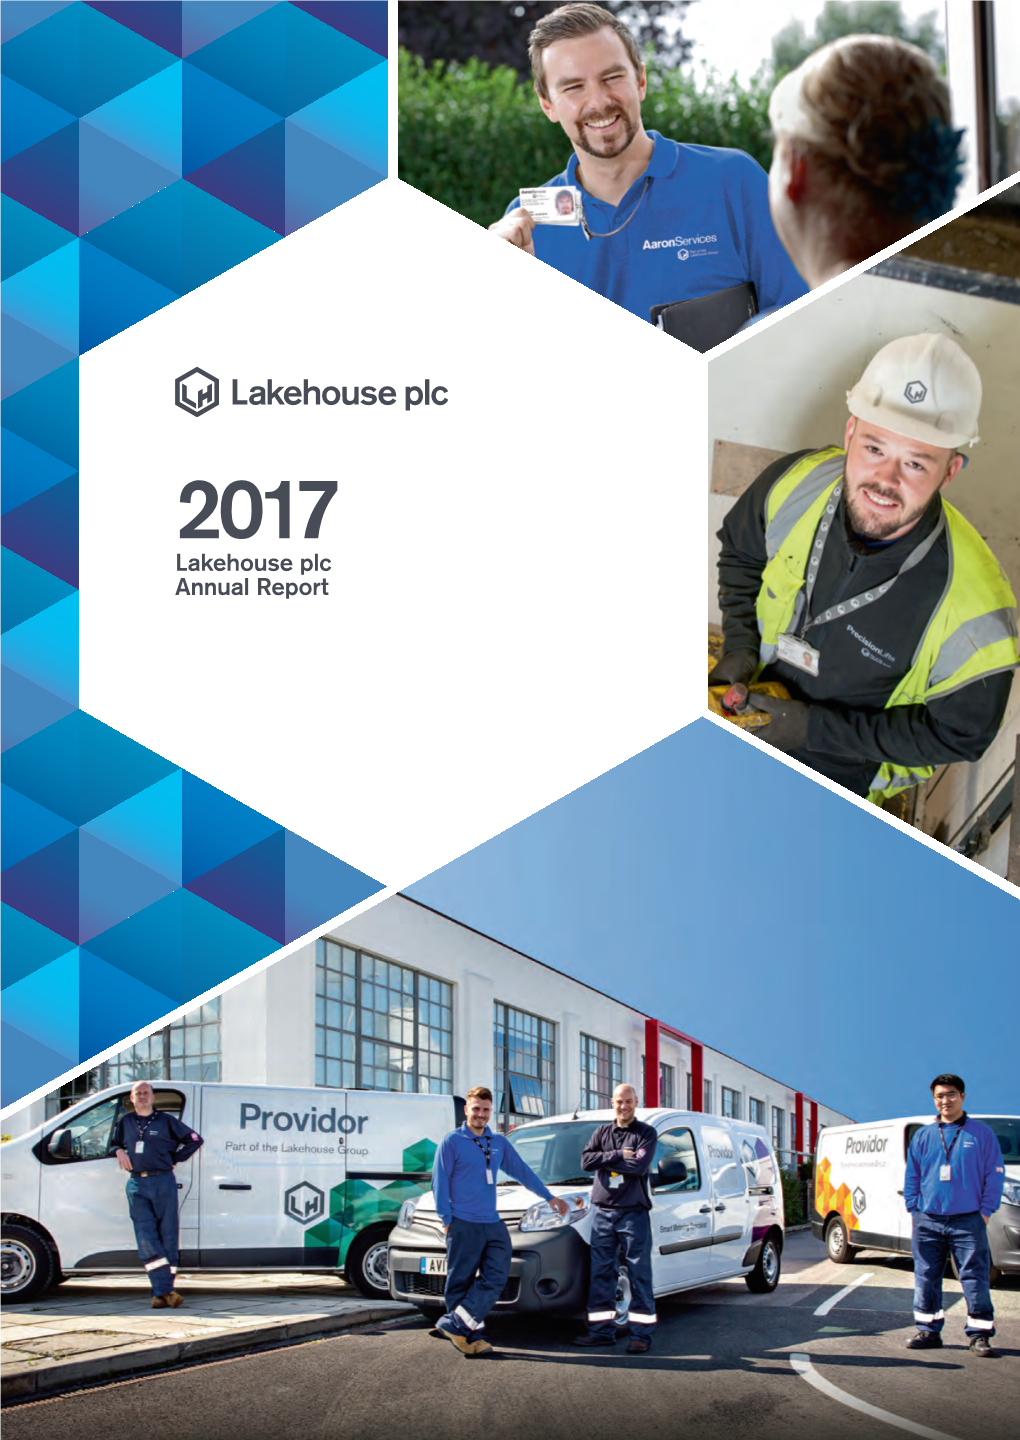 Lakehouse Plc Annual Report 2017 01 Our Four Divisions Make an Impact Through Deeper Relationships